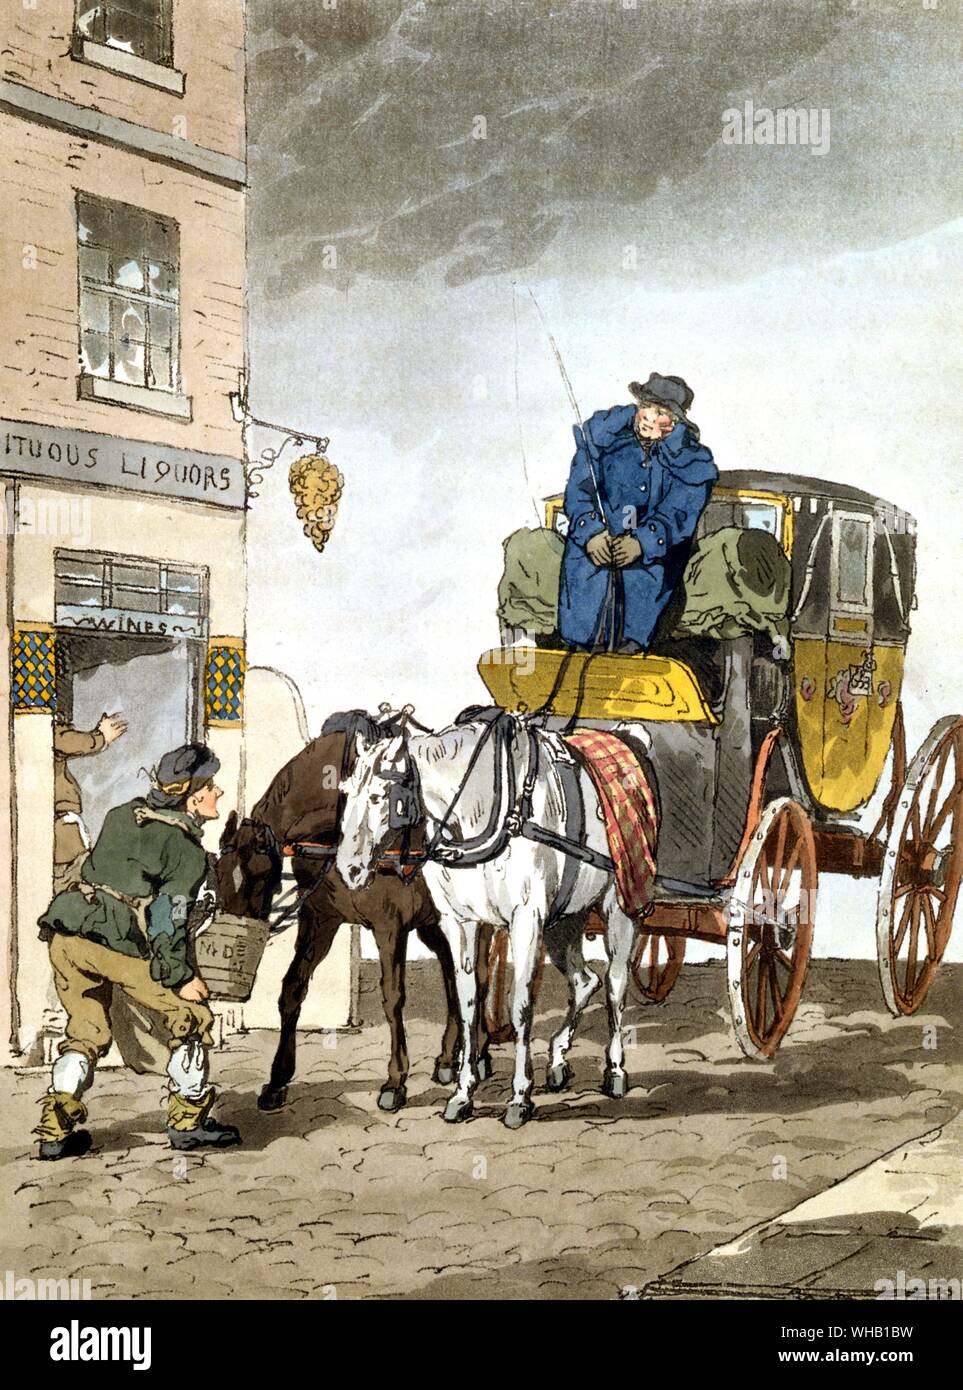 Hackney coach from Picturesque Representations of Costumes of Great Britain 1807 by J. Atkinson. V&A Library. Stock Photo